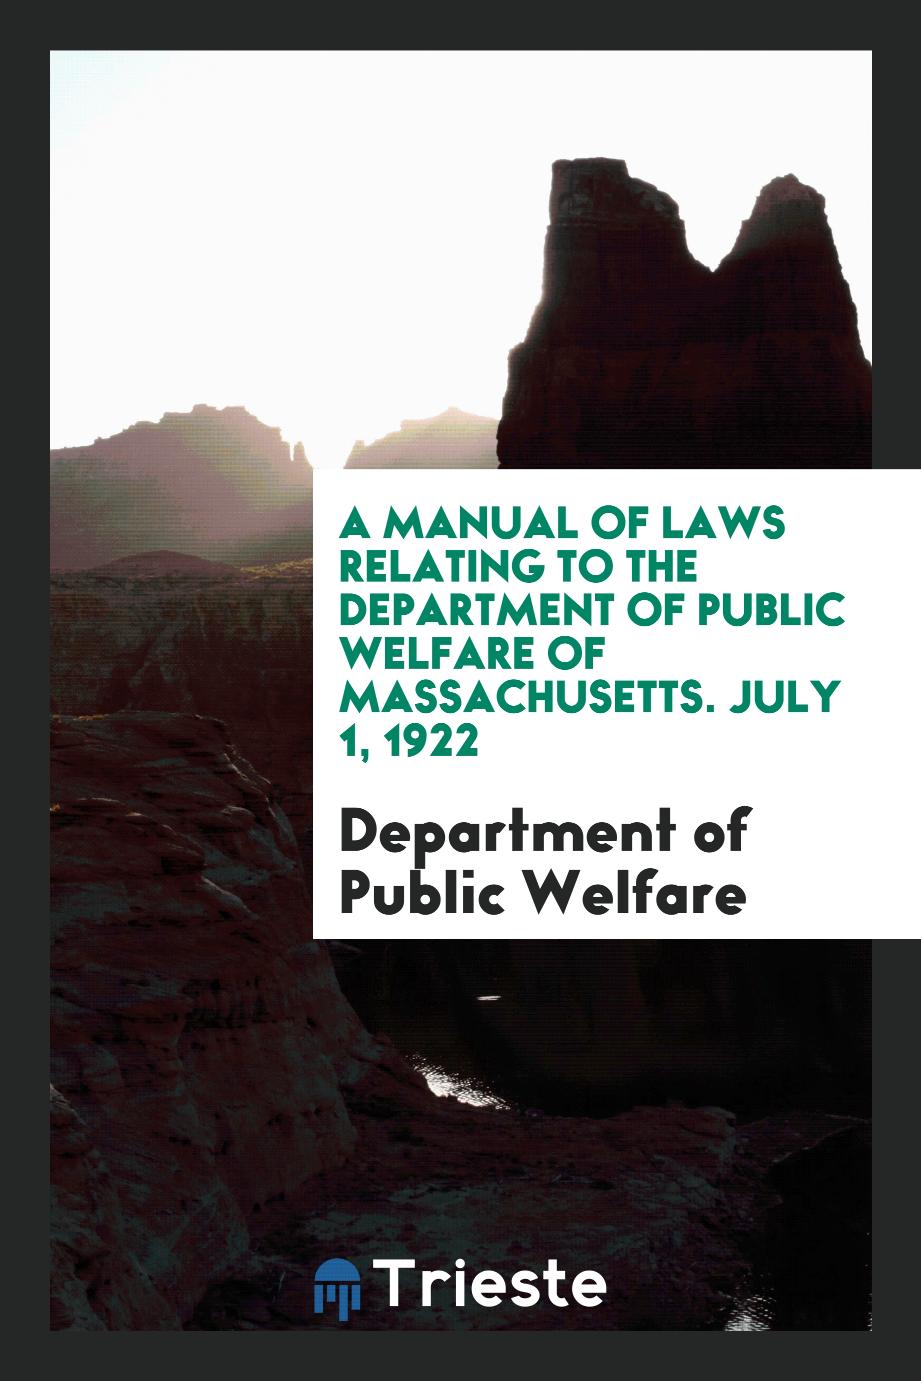 A Manual of Laws Relating to the Department of Public Welfare of Massachusetts. July 1, 1922